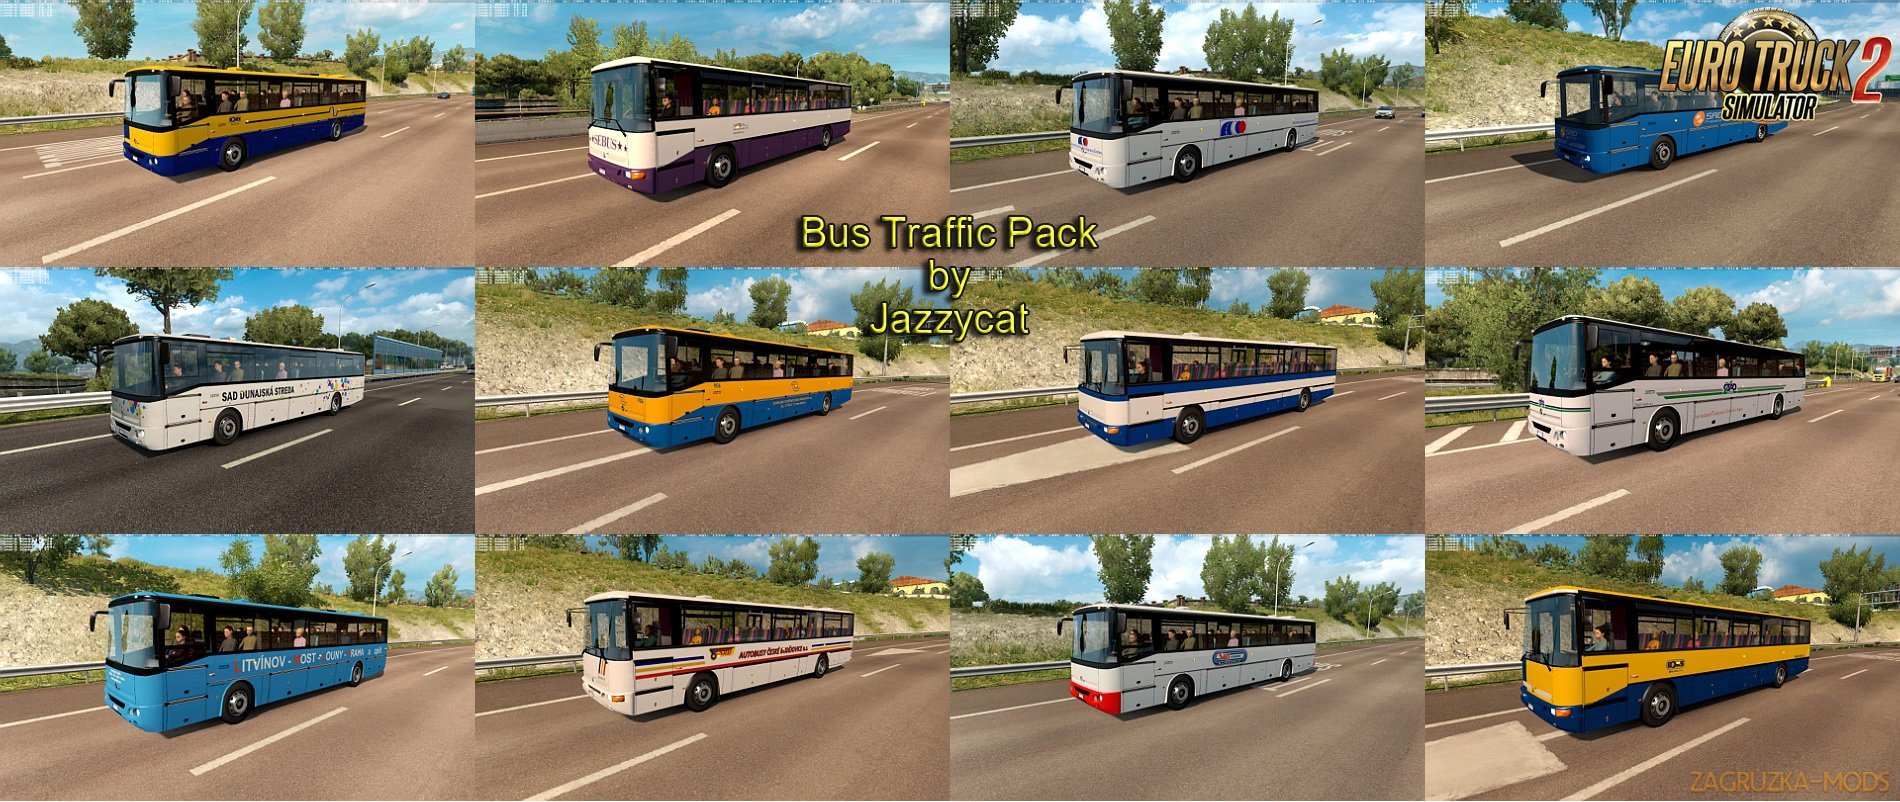 Bus Traffic Pack v3.9 by Jazzycat